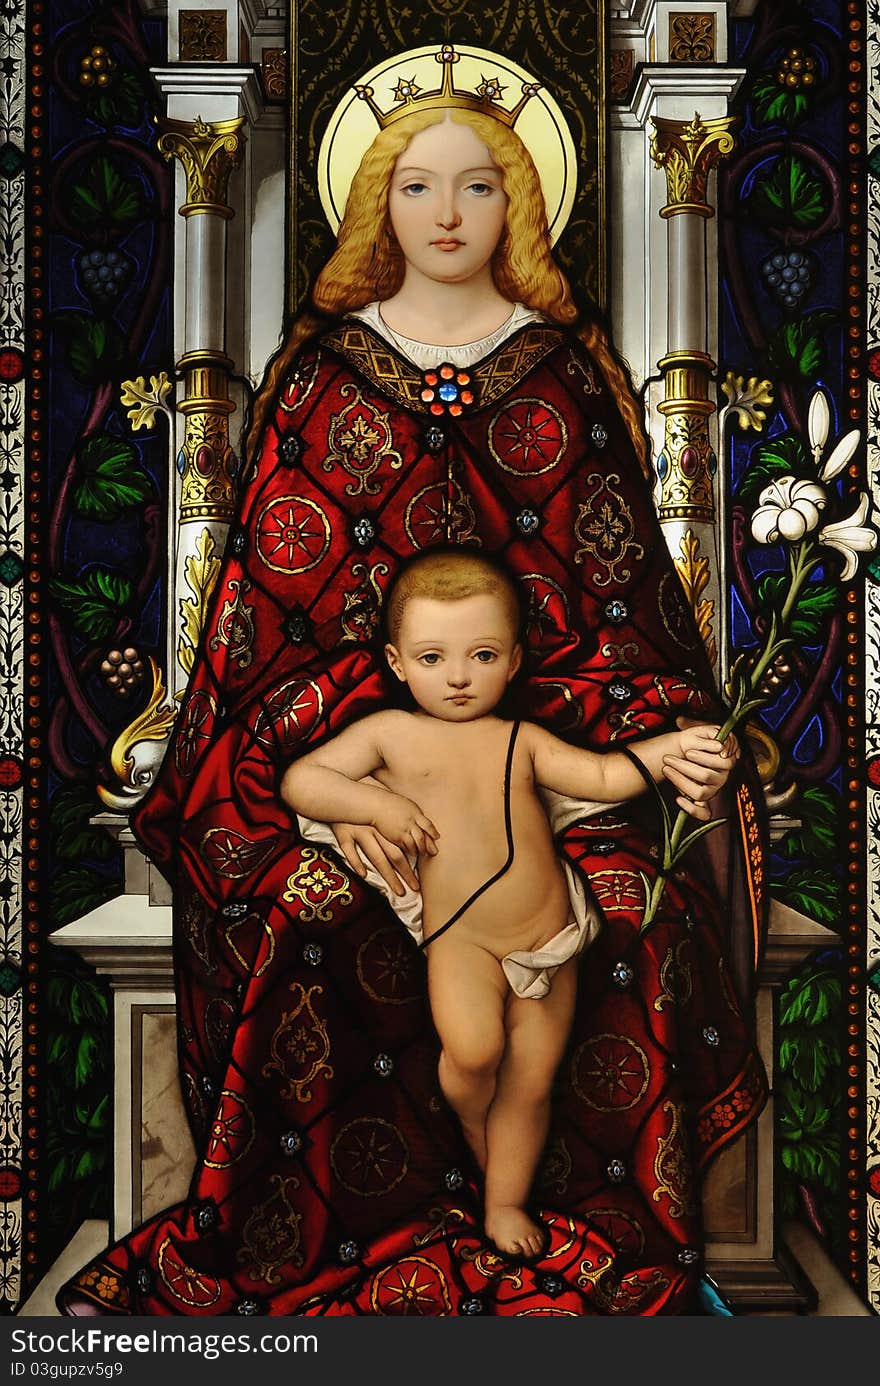 Madonna with Child in Stained Glass Window